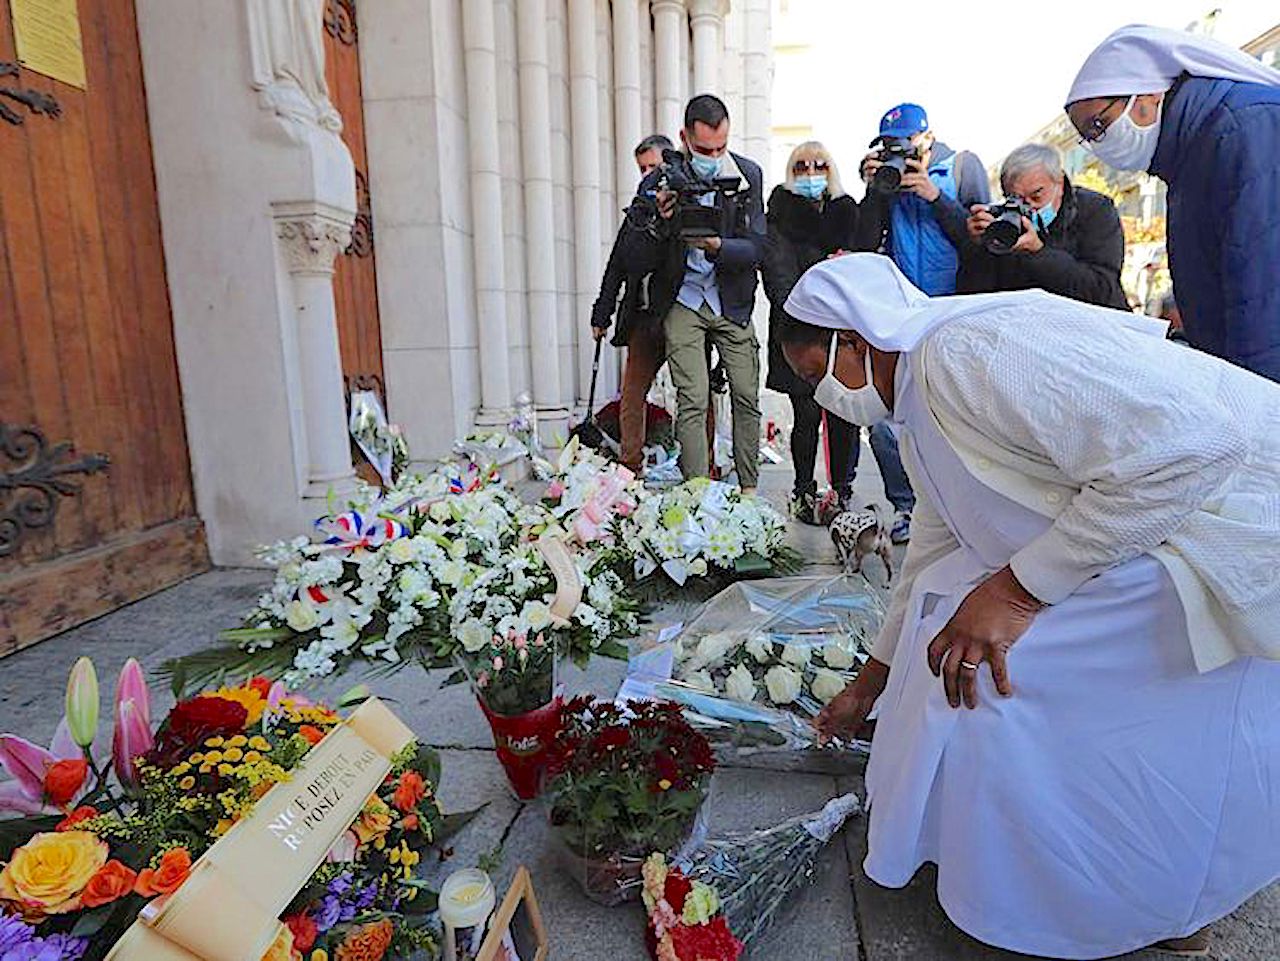 Two nuns lay flowers in front of the Notre-Dame de l'Assomption Basilica in Nice on October 30, 2020 during a tribute to the victims killed by a knife attacker the day before (Image by AFP)